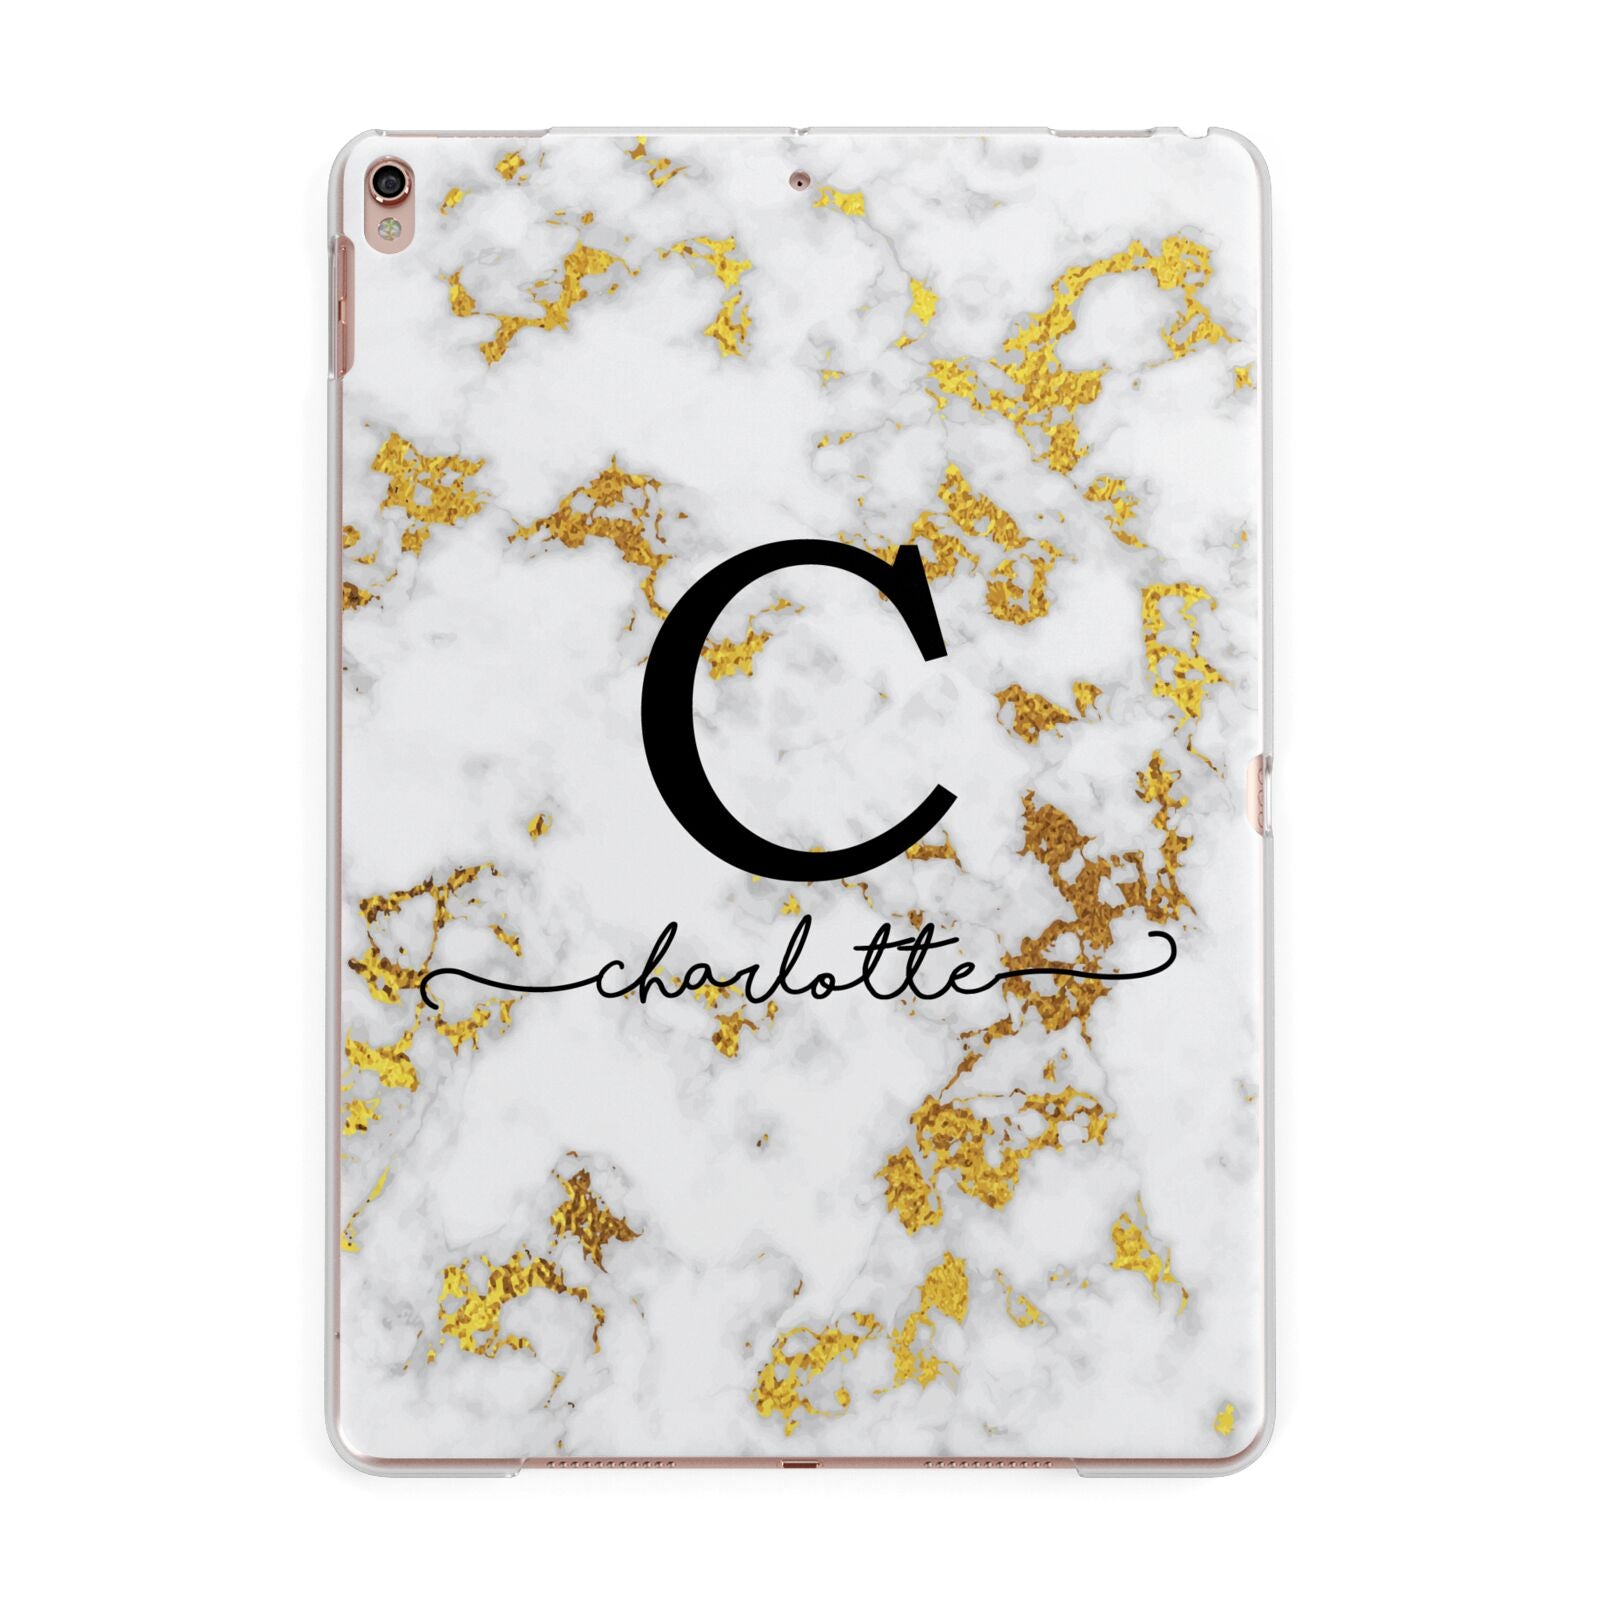 Initialled White Gold Marble with Name Apple iPad Rose Gold Case